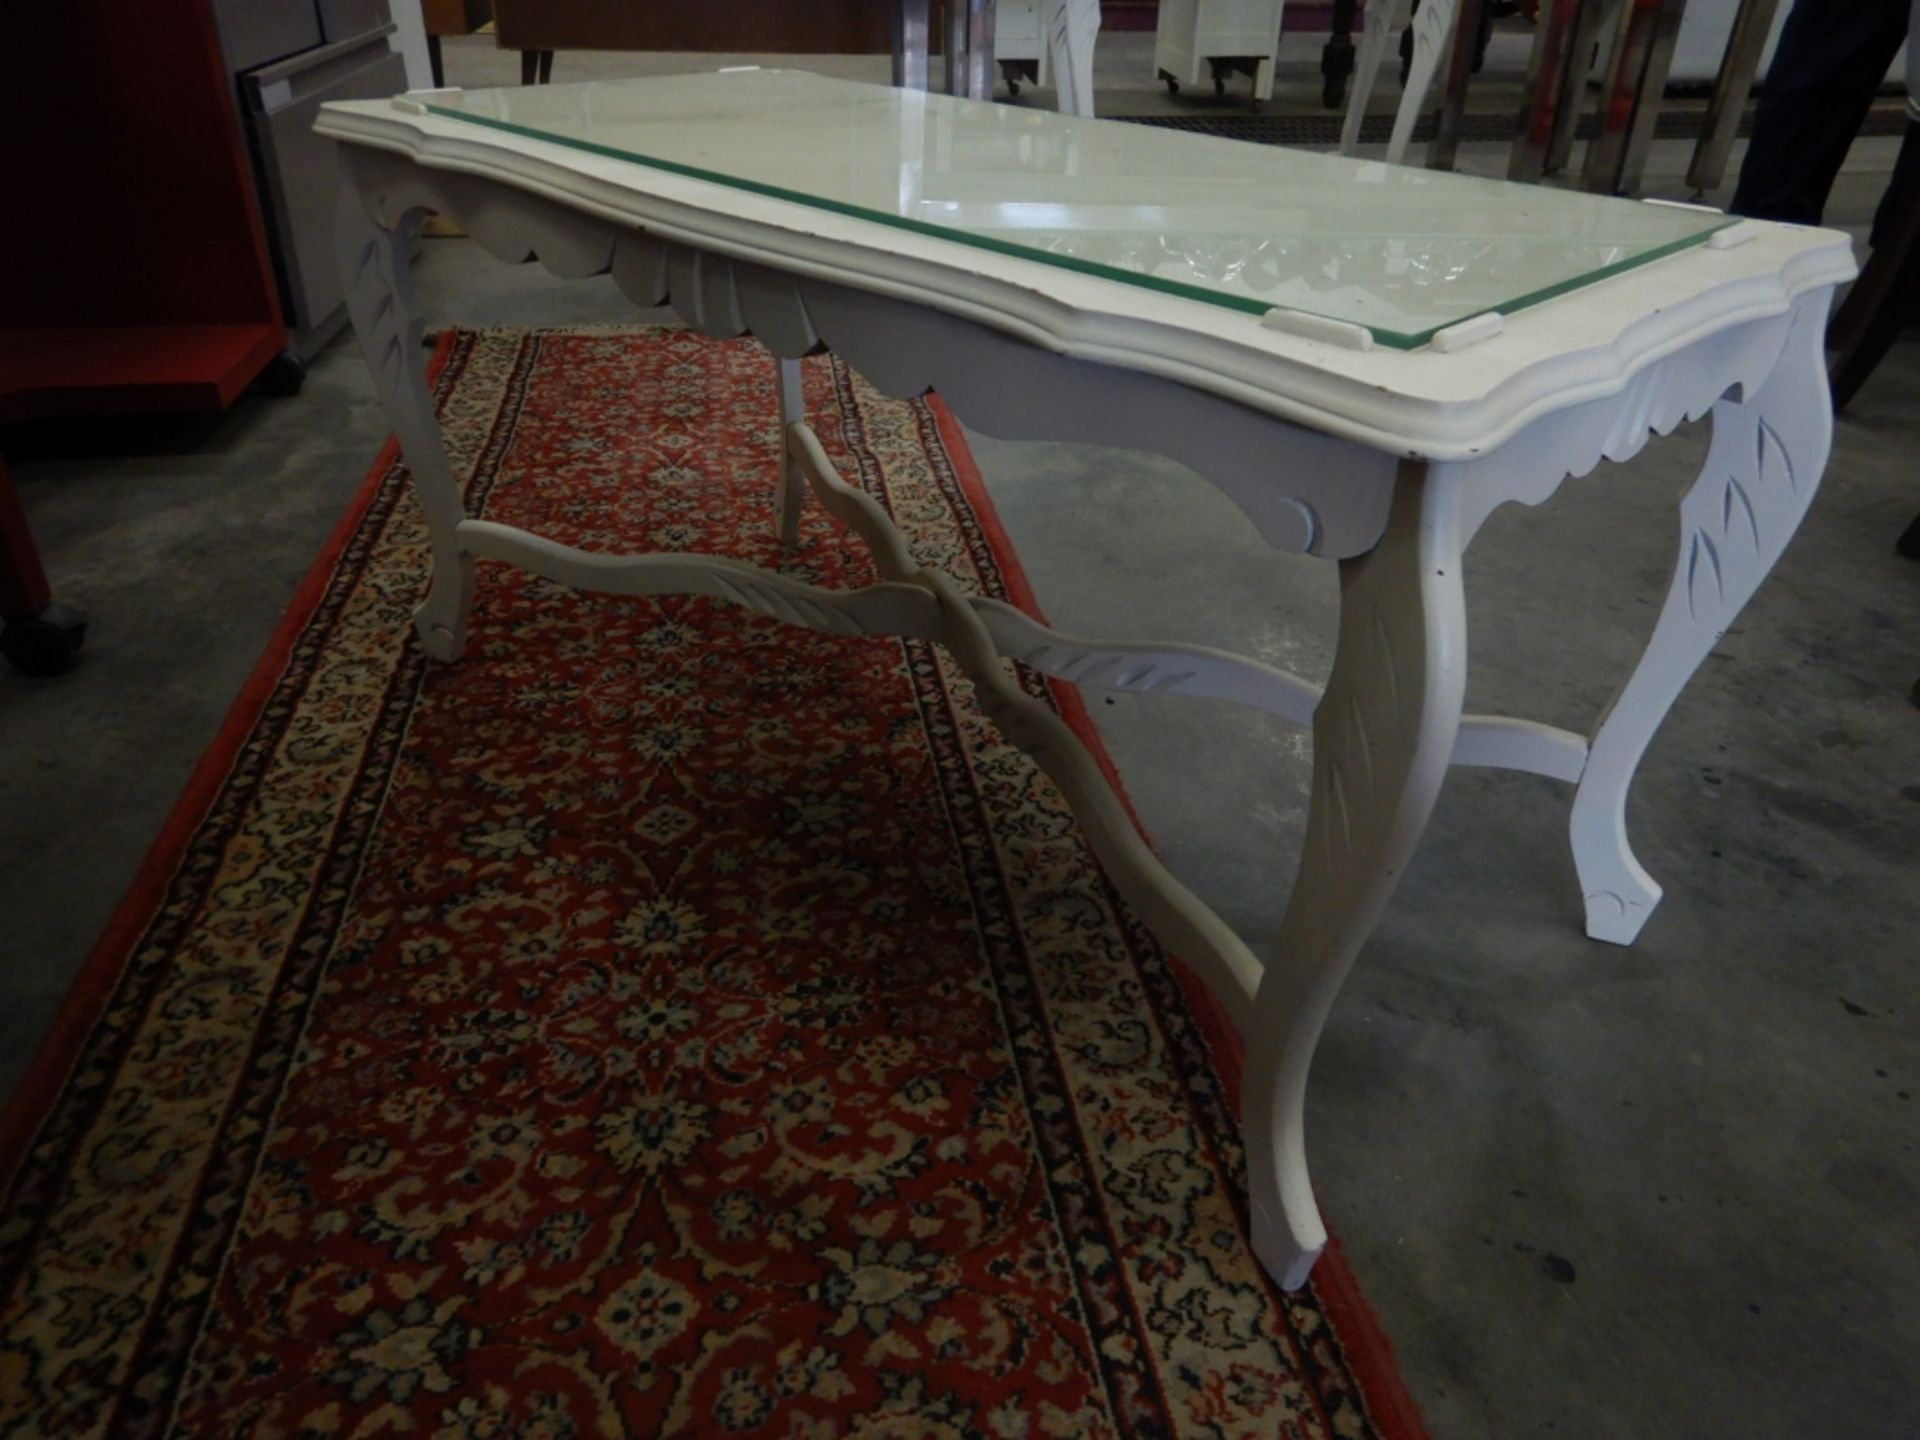 ANTIQUE COFFEE TABLE PAINTED OFF WHITE, W/GLASS INSET TOP-33 3/4"W X 17"D X 17 1/4"H - Image 2 of 3